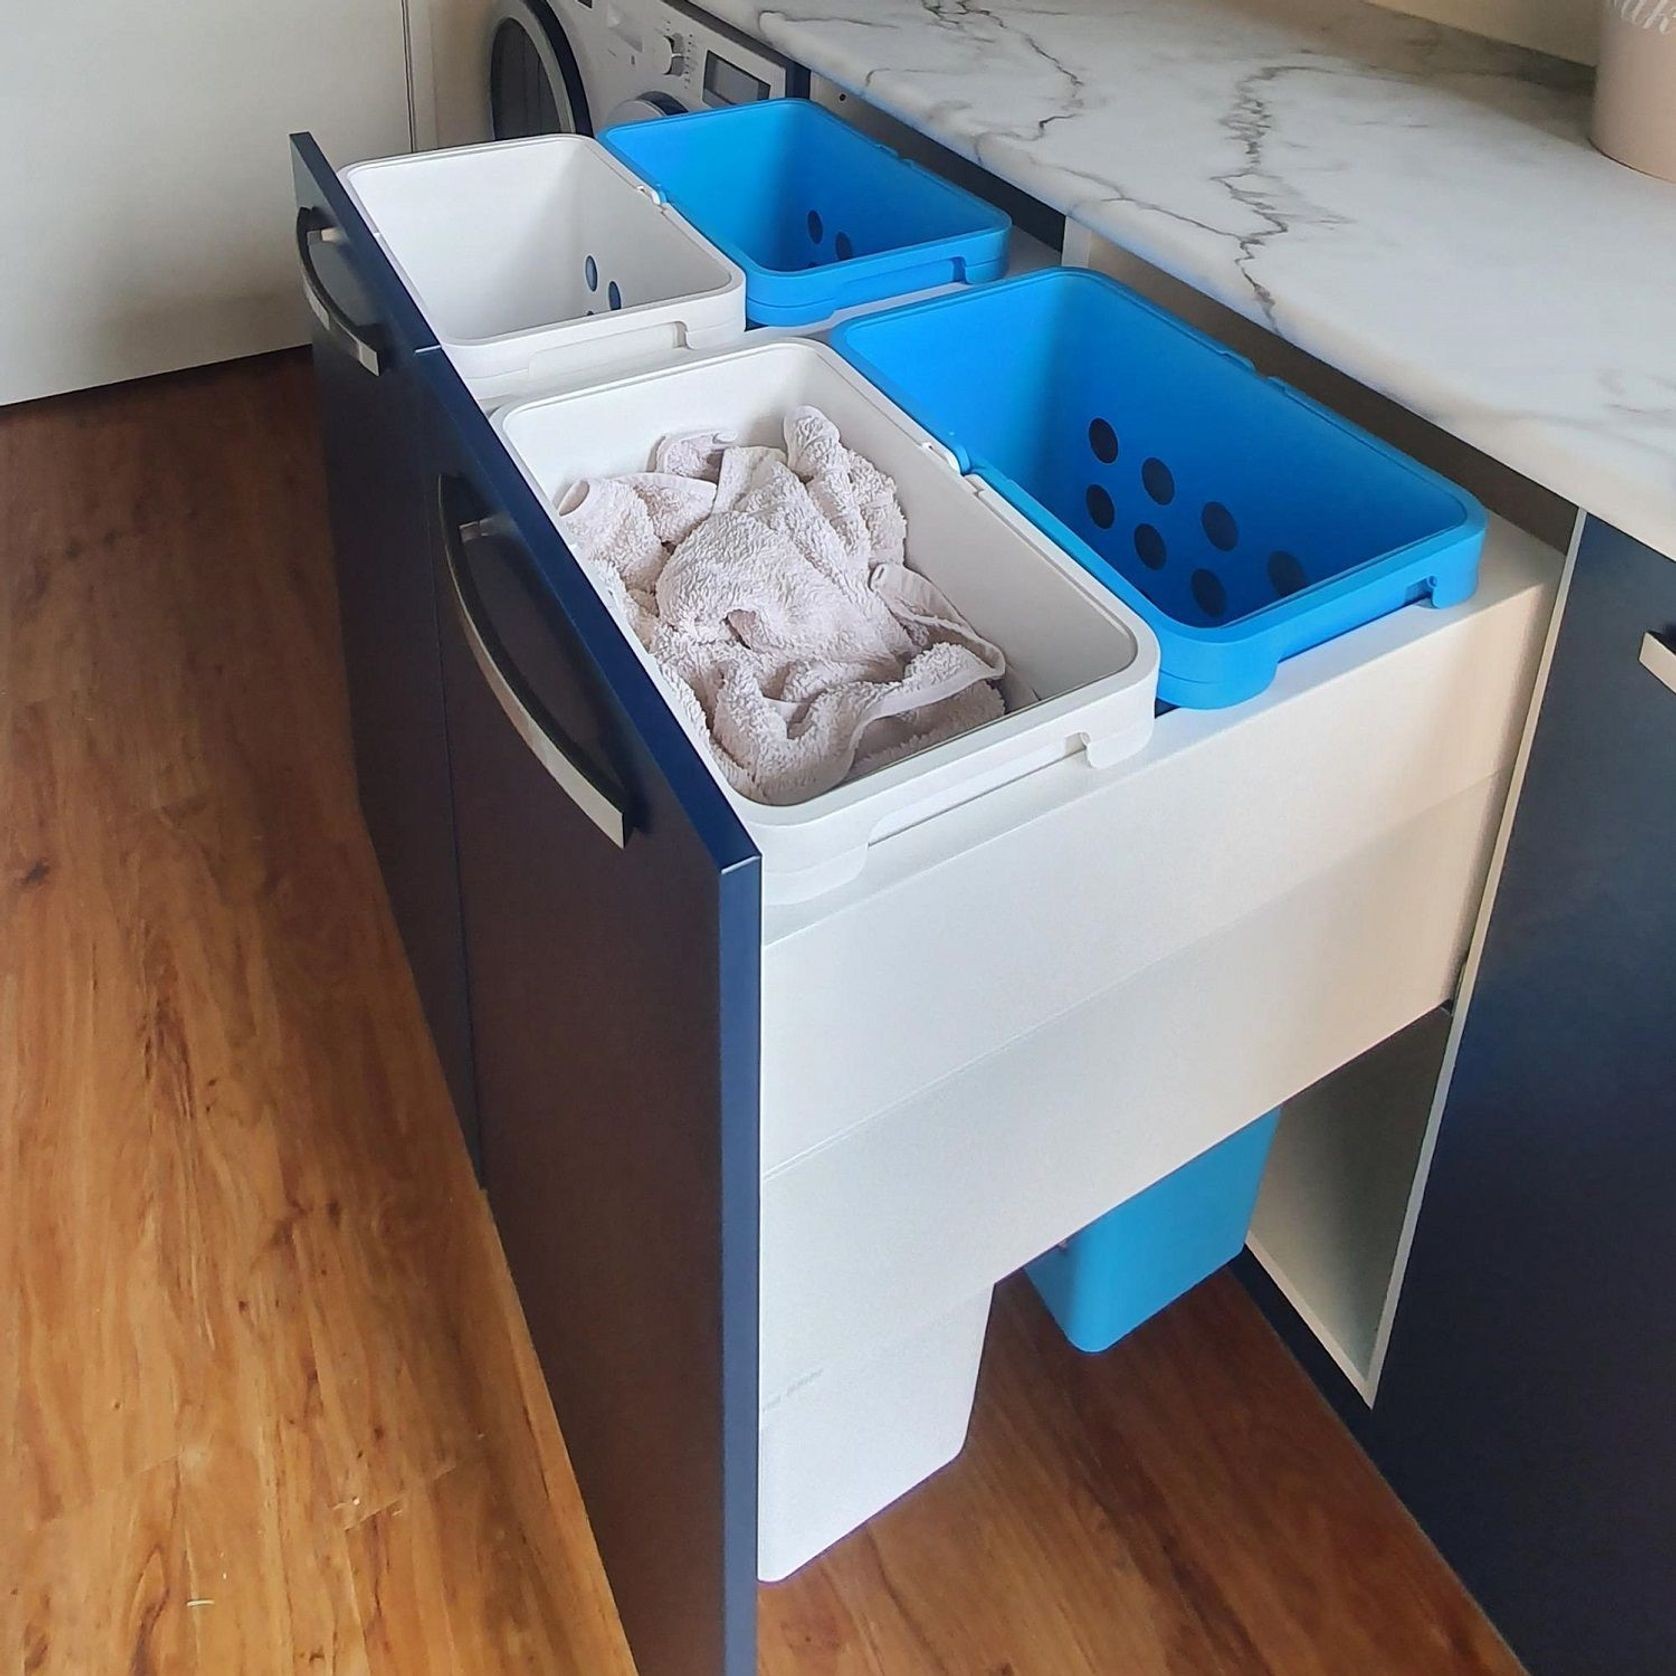 Tanova Designer Series 2 Pull Out Laundry Unit | ArchiPro NZ